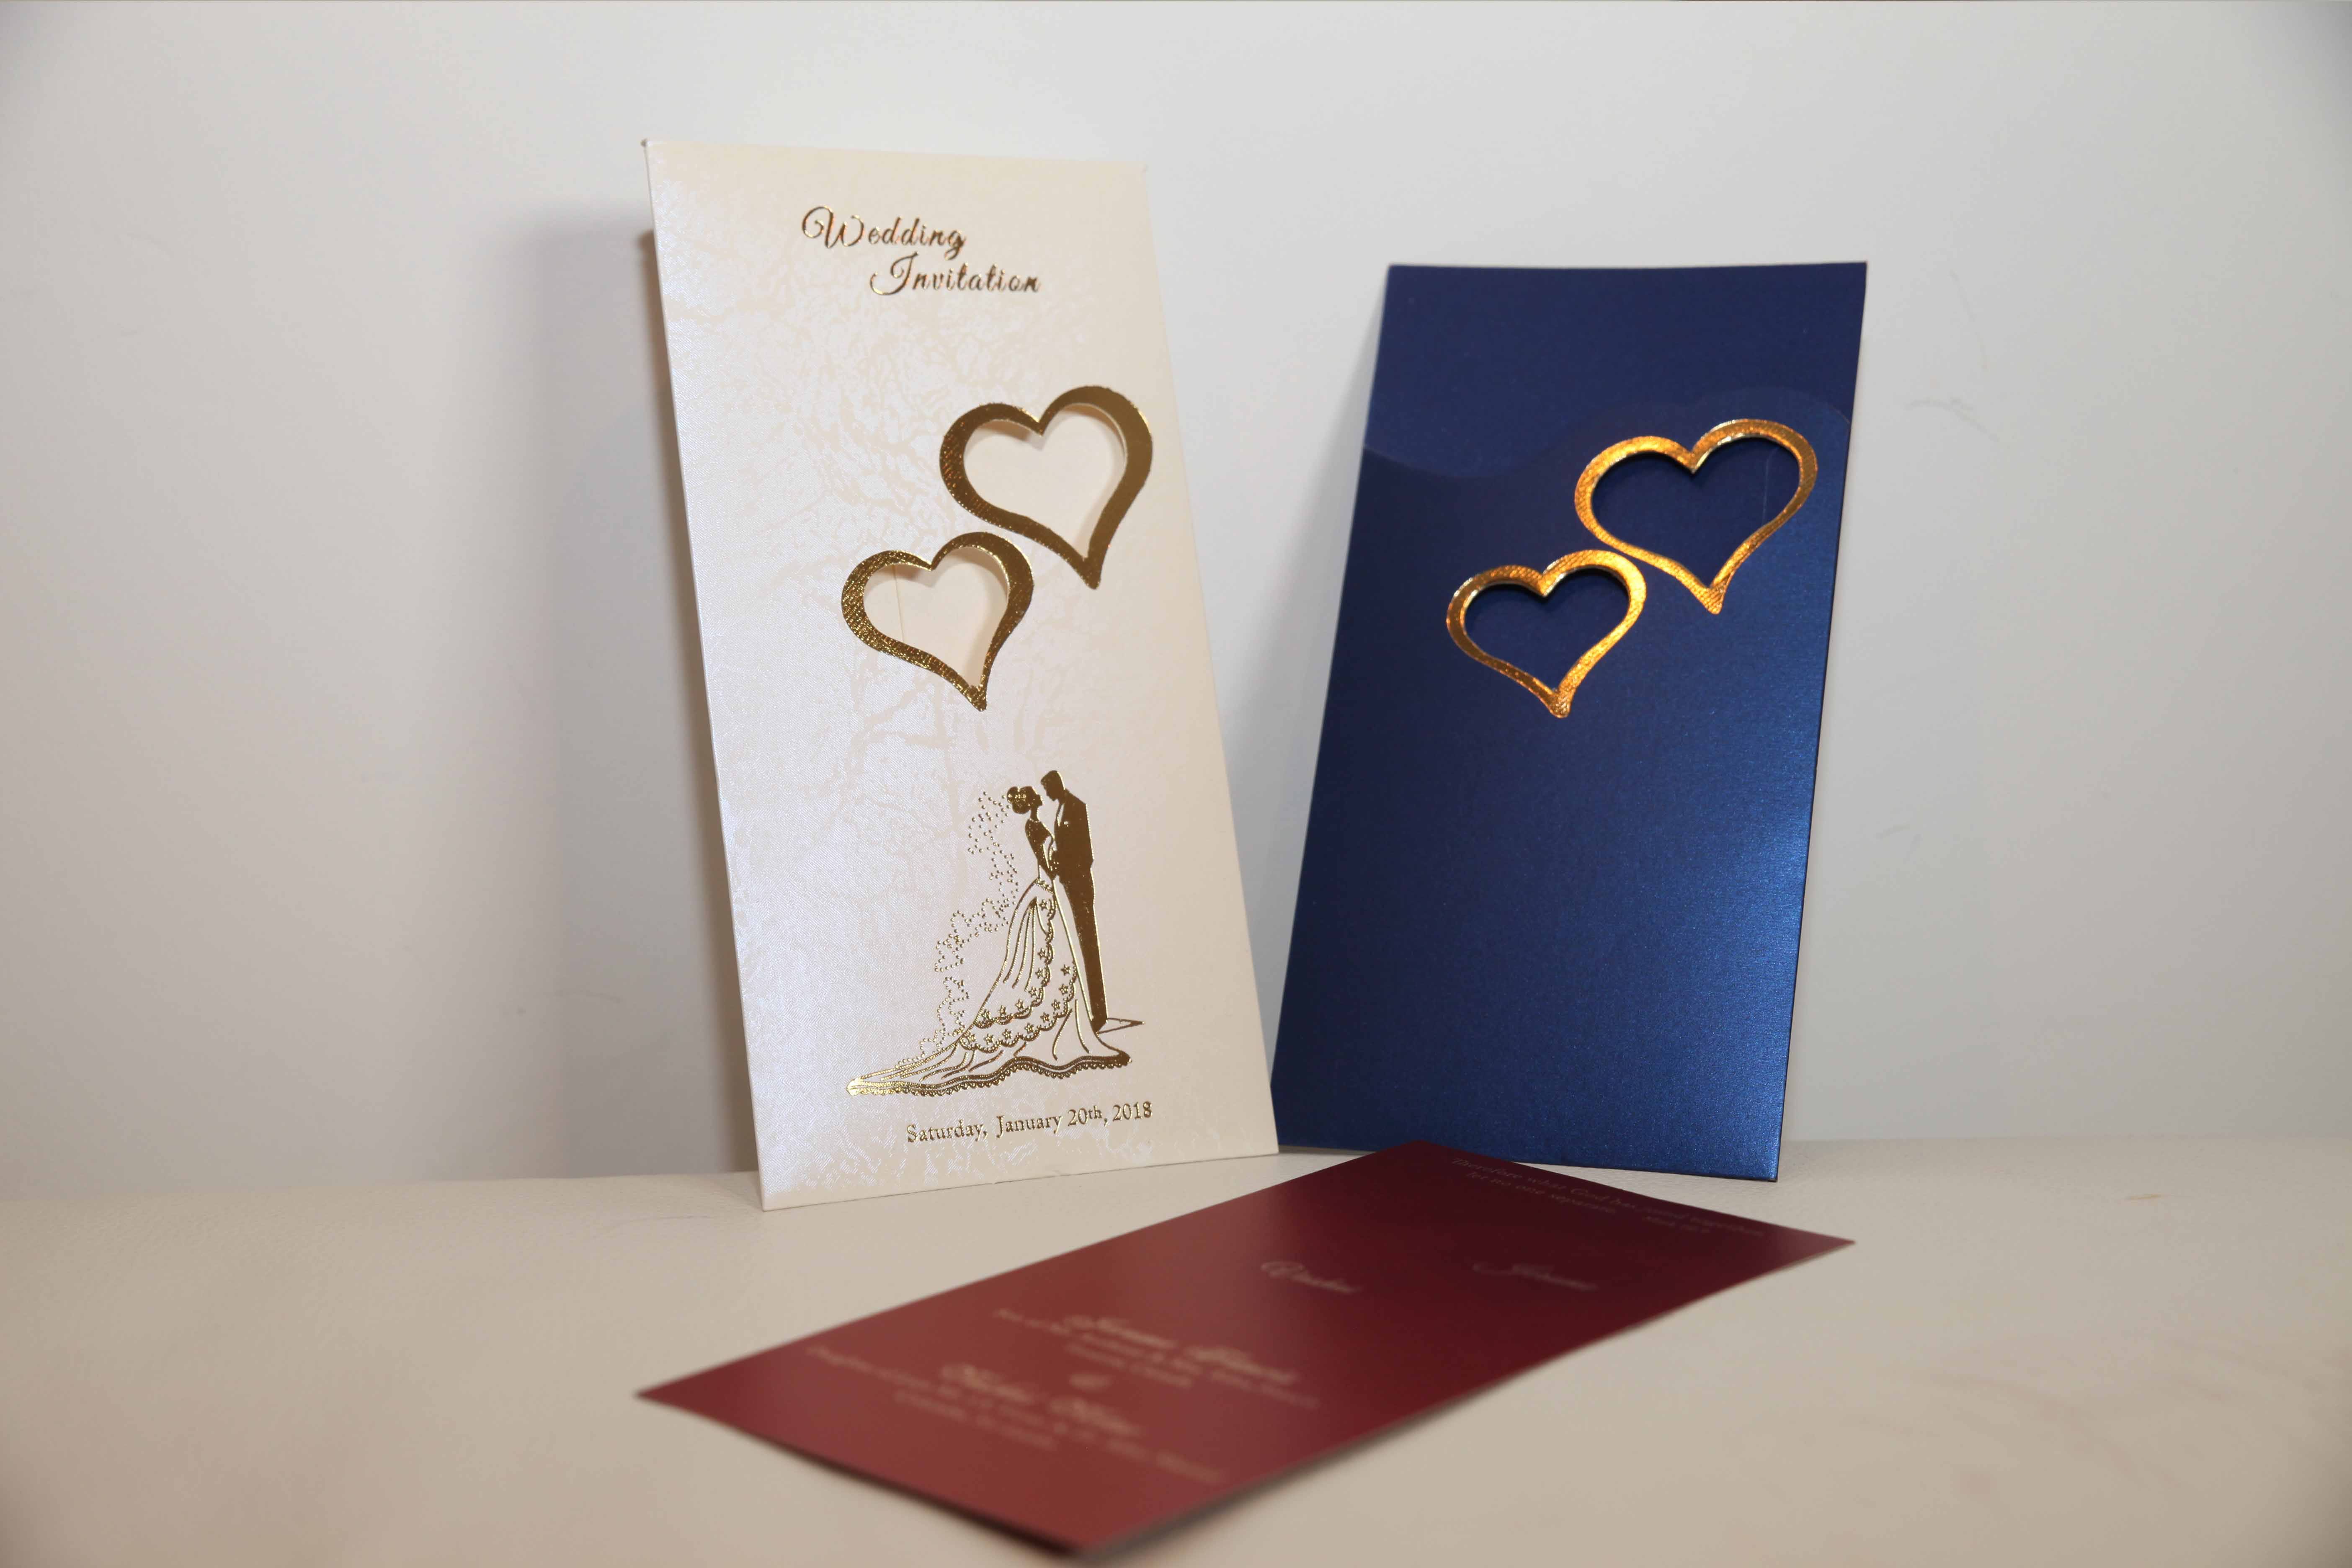 hindu-wedding-cards-is-a-well-known-brand-in-the-uk